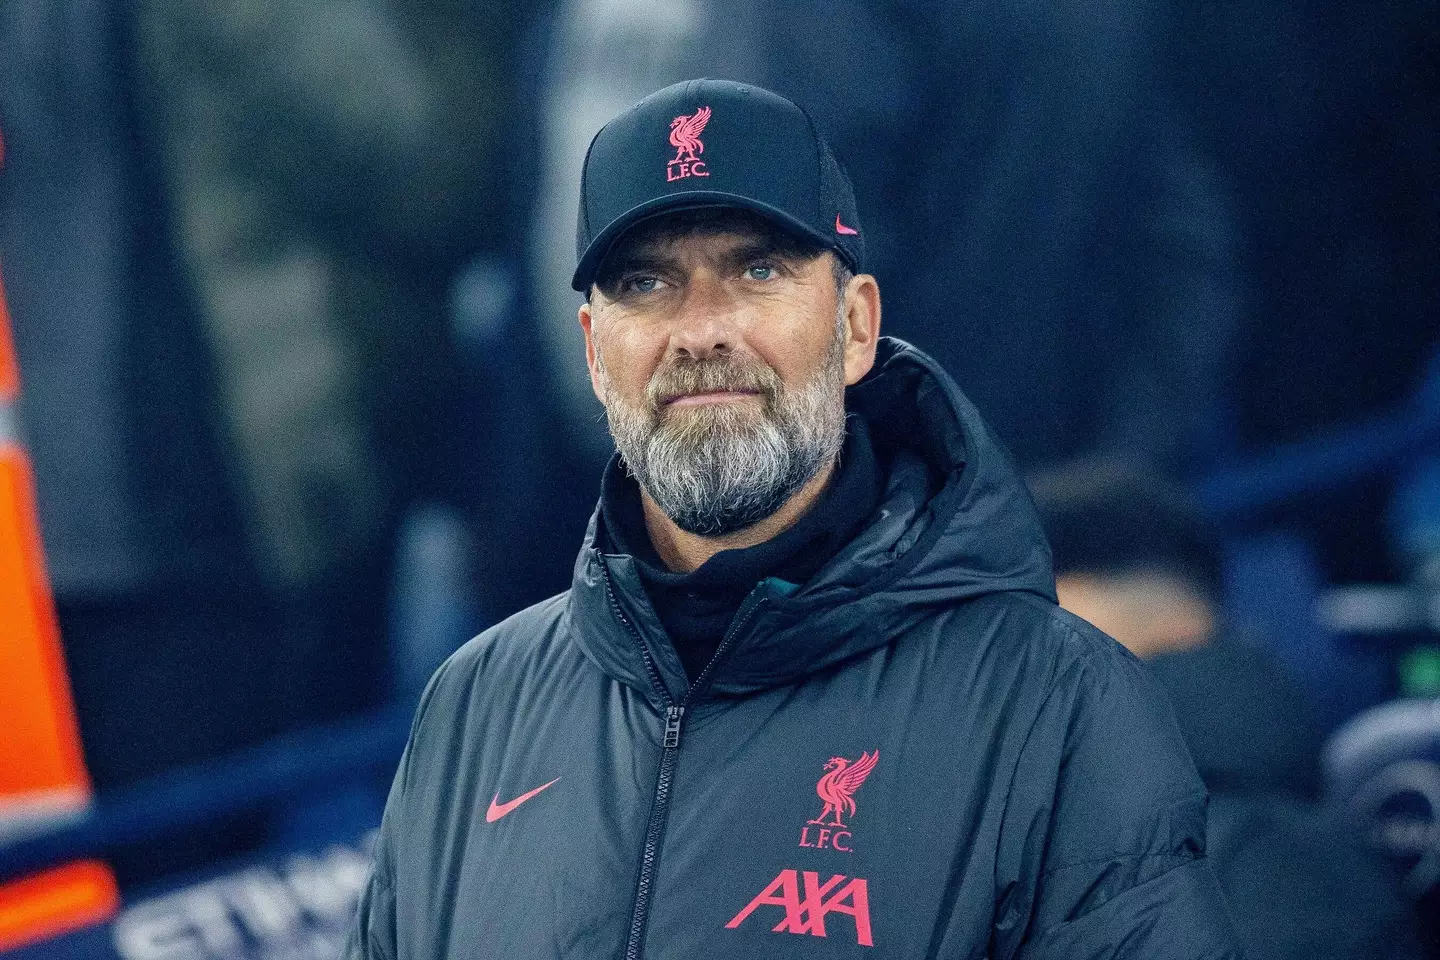 Jurgen Klopp will take charge of his 1000th competitive game (Alamy)